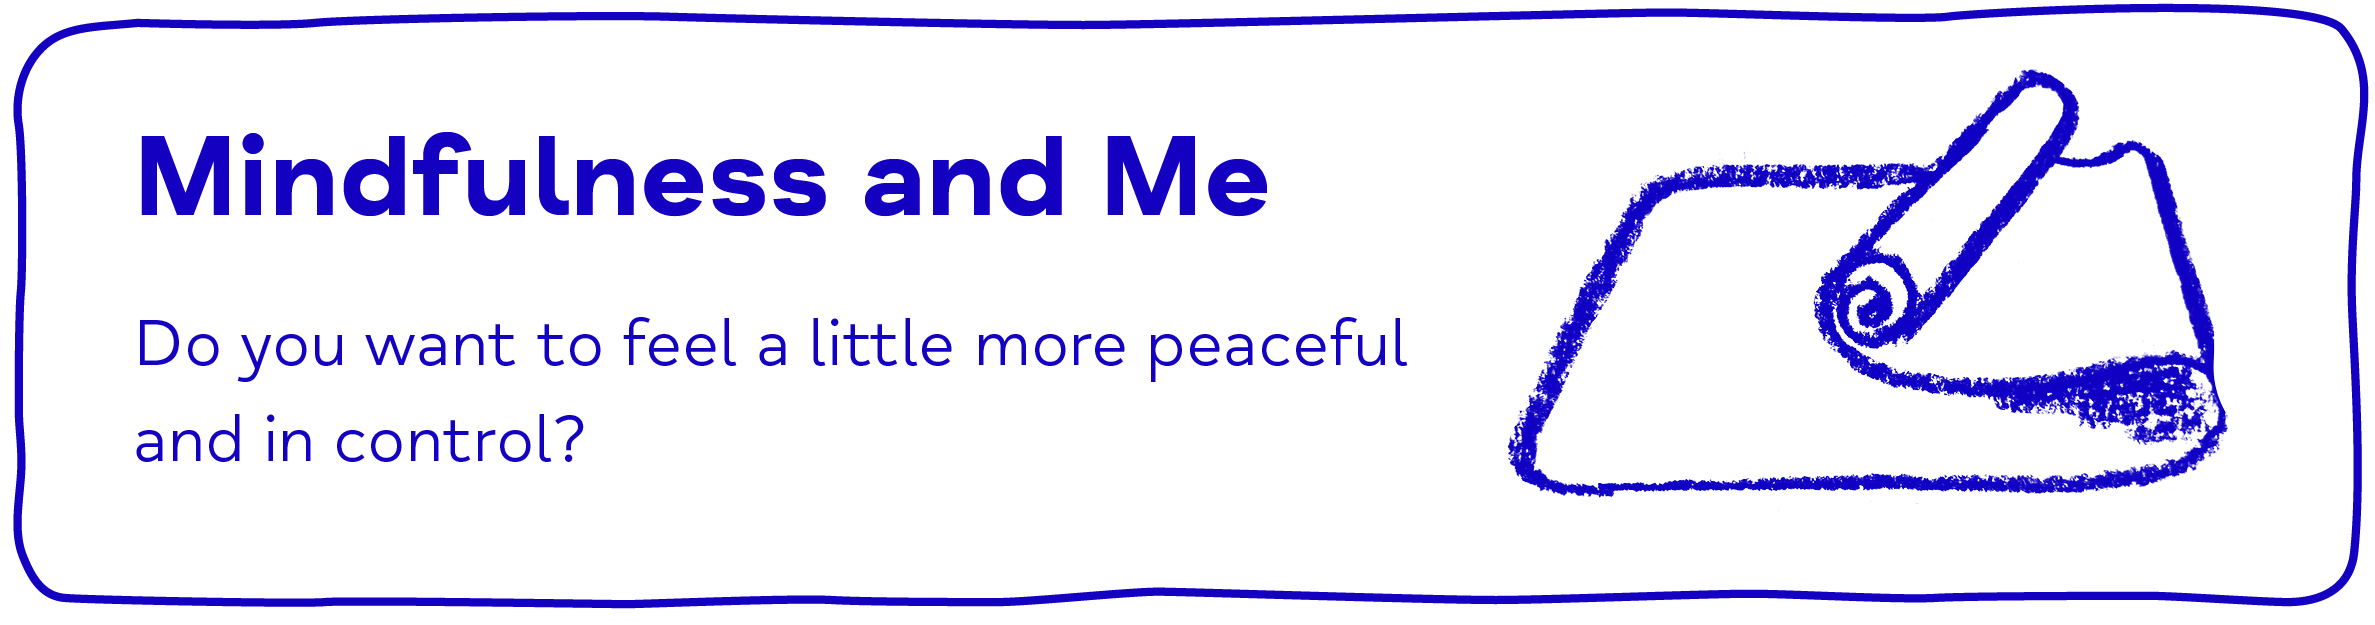 Mindfulness and Me Do you want to feel a little more peaceful and in control?